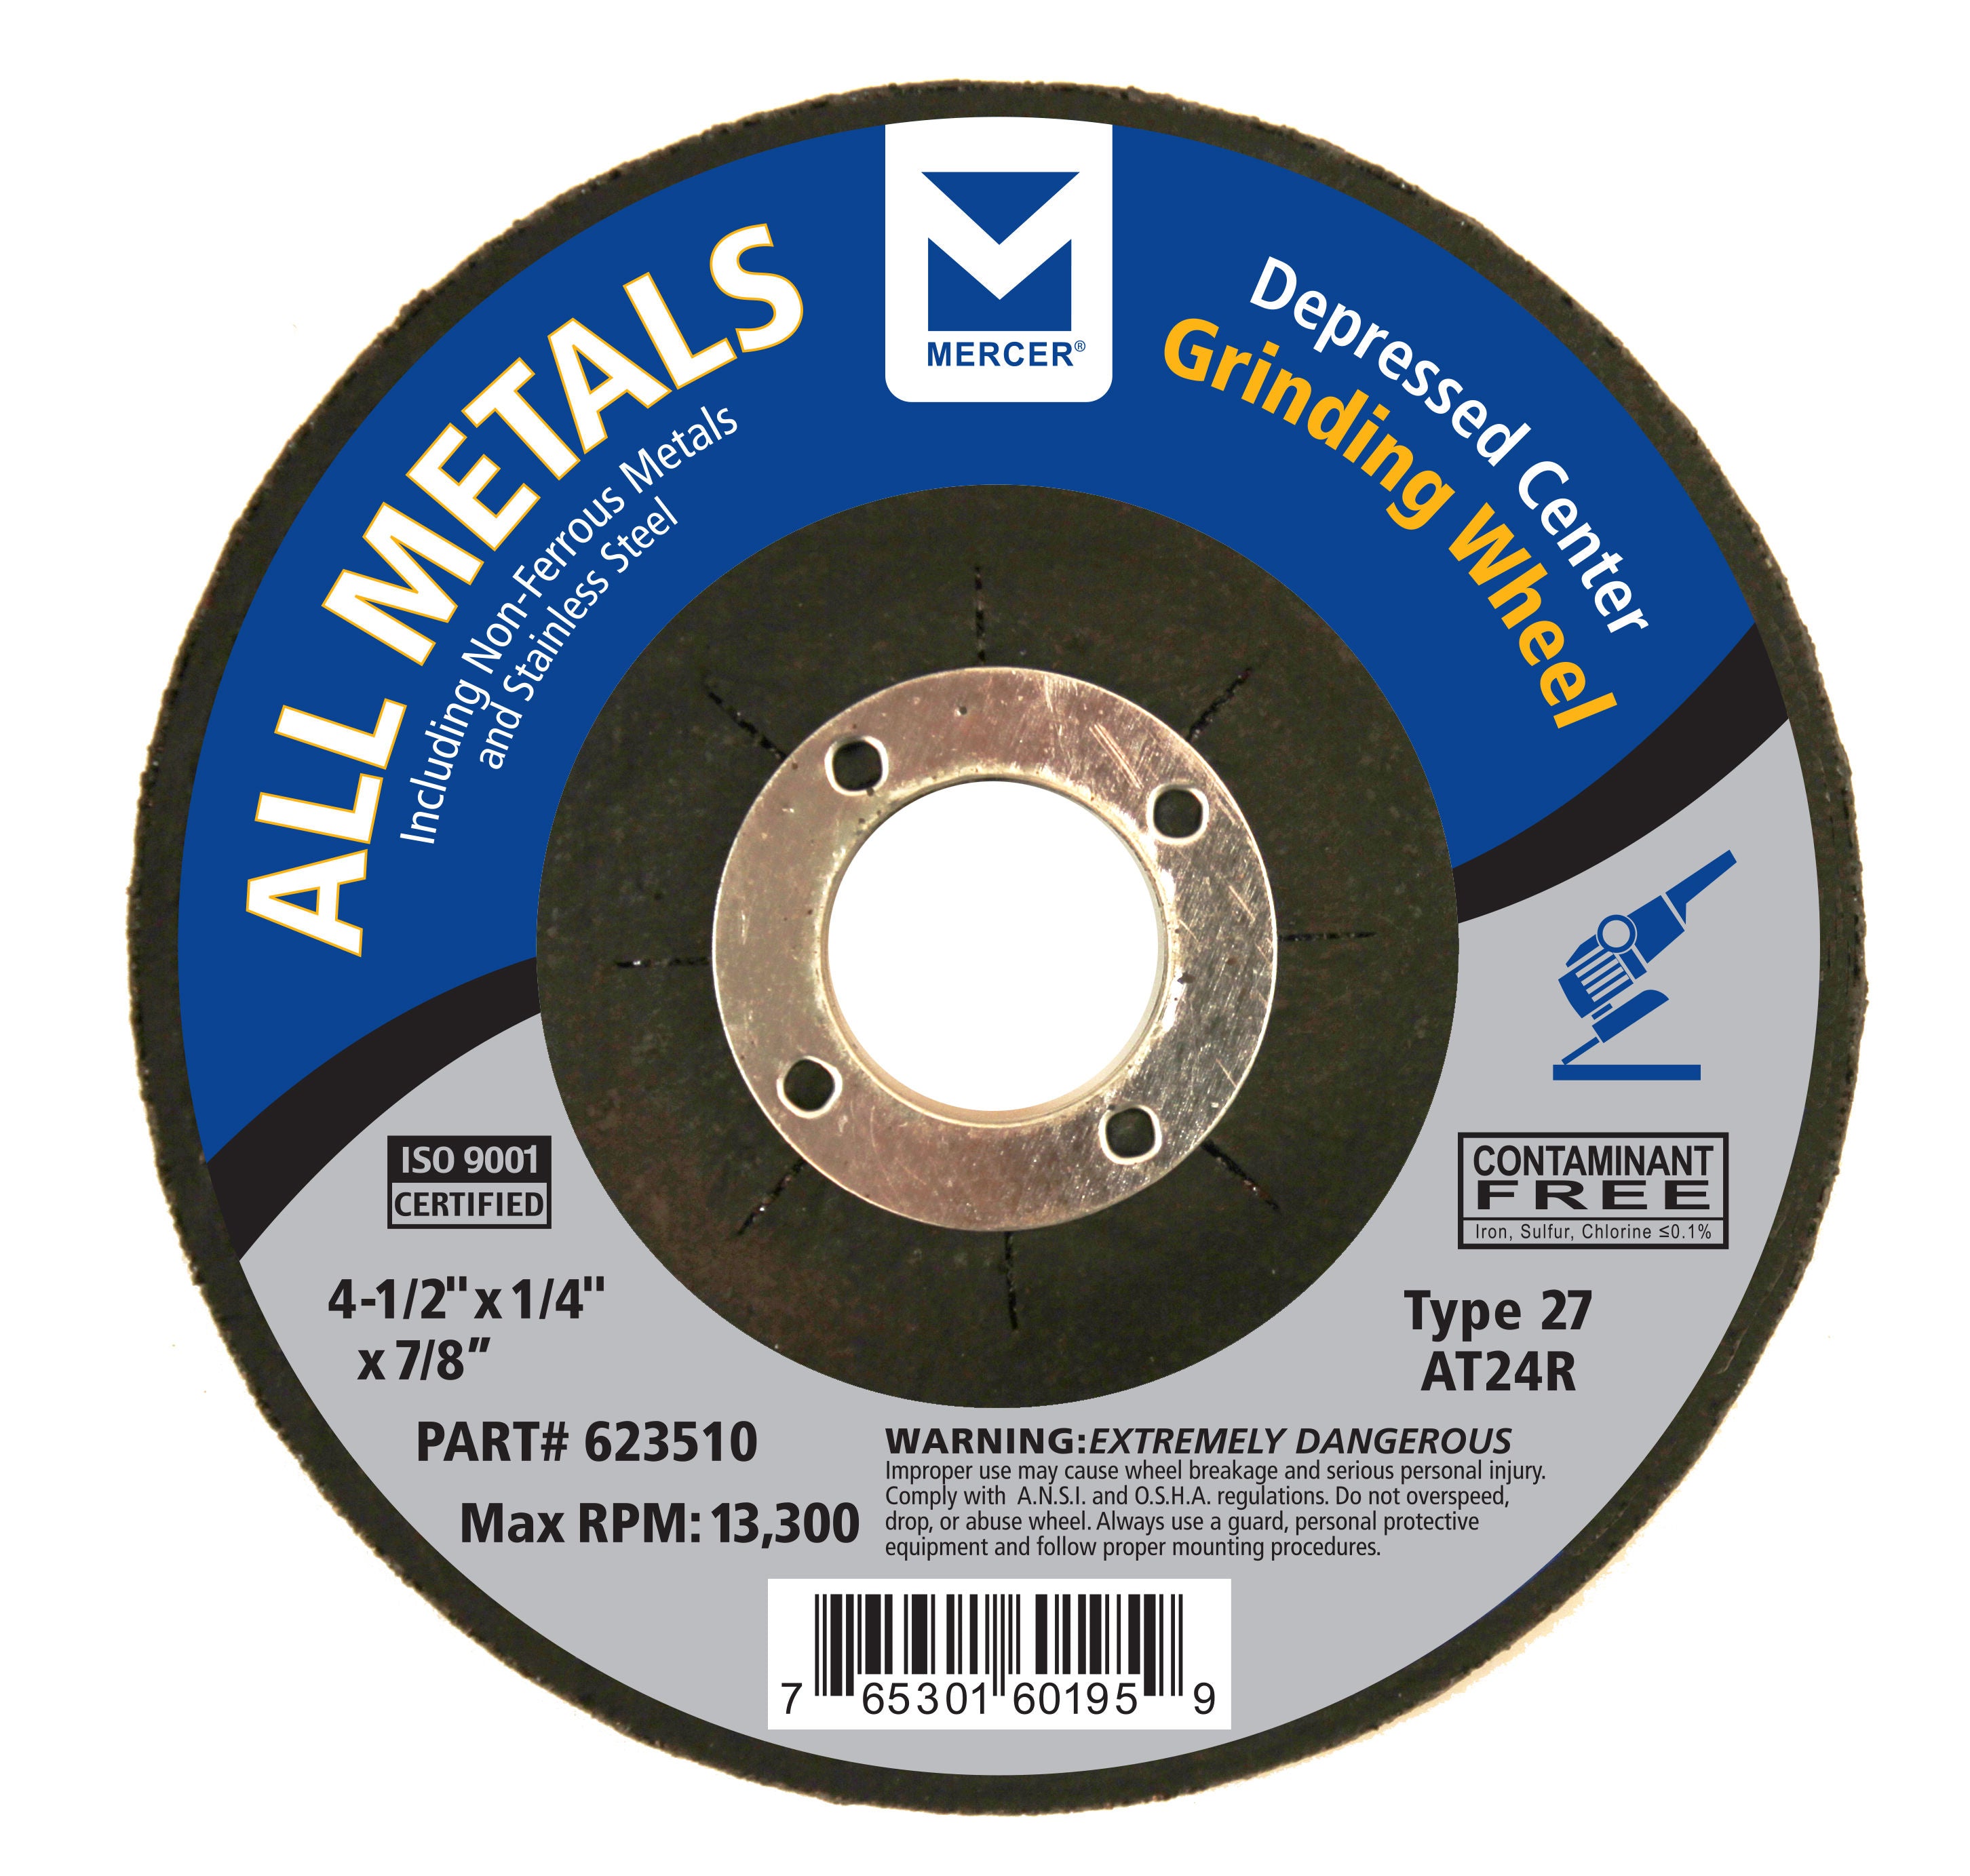 7" x 1/4" x 7/8" AT24R T27 Depressed Center Grinding Wheel for Stainless Steel - Single Grit